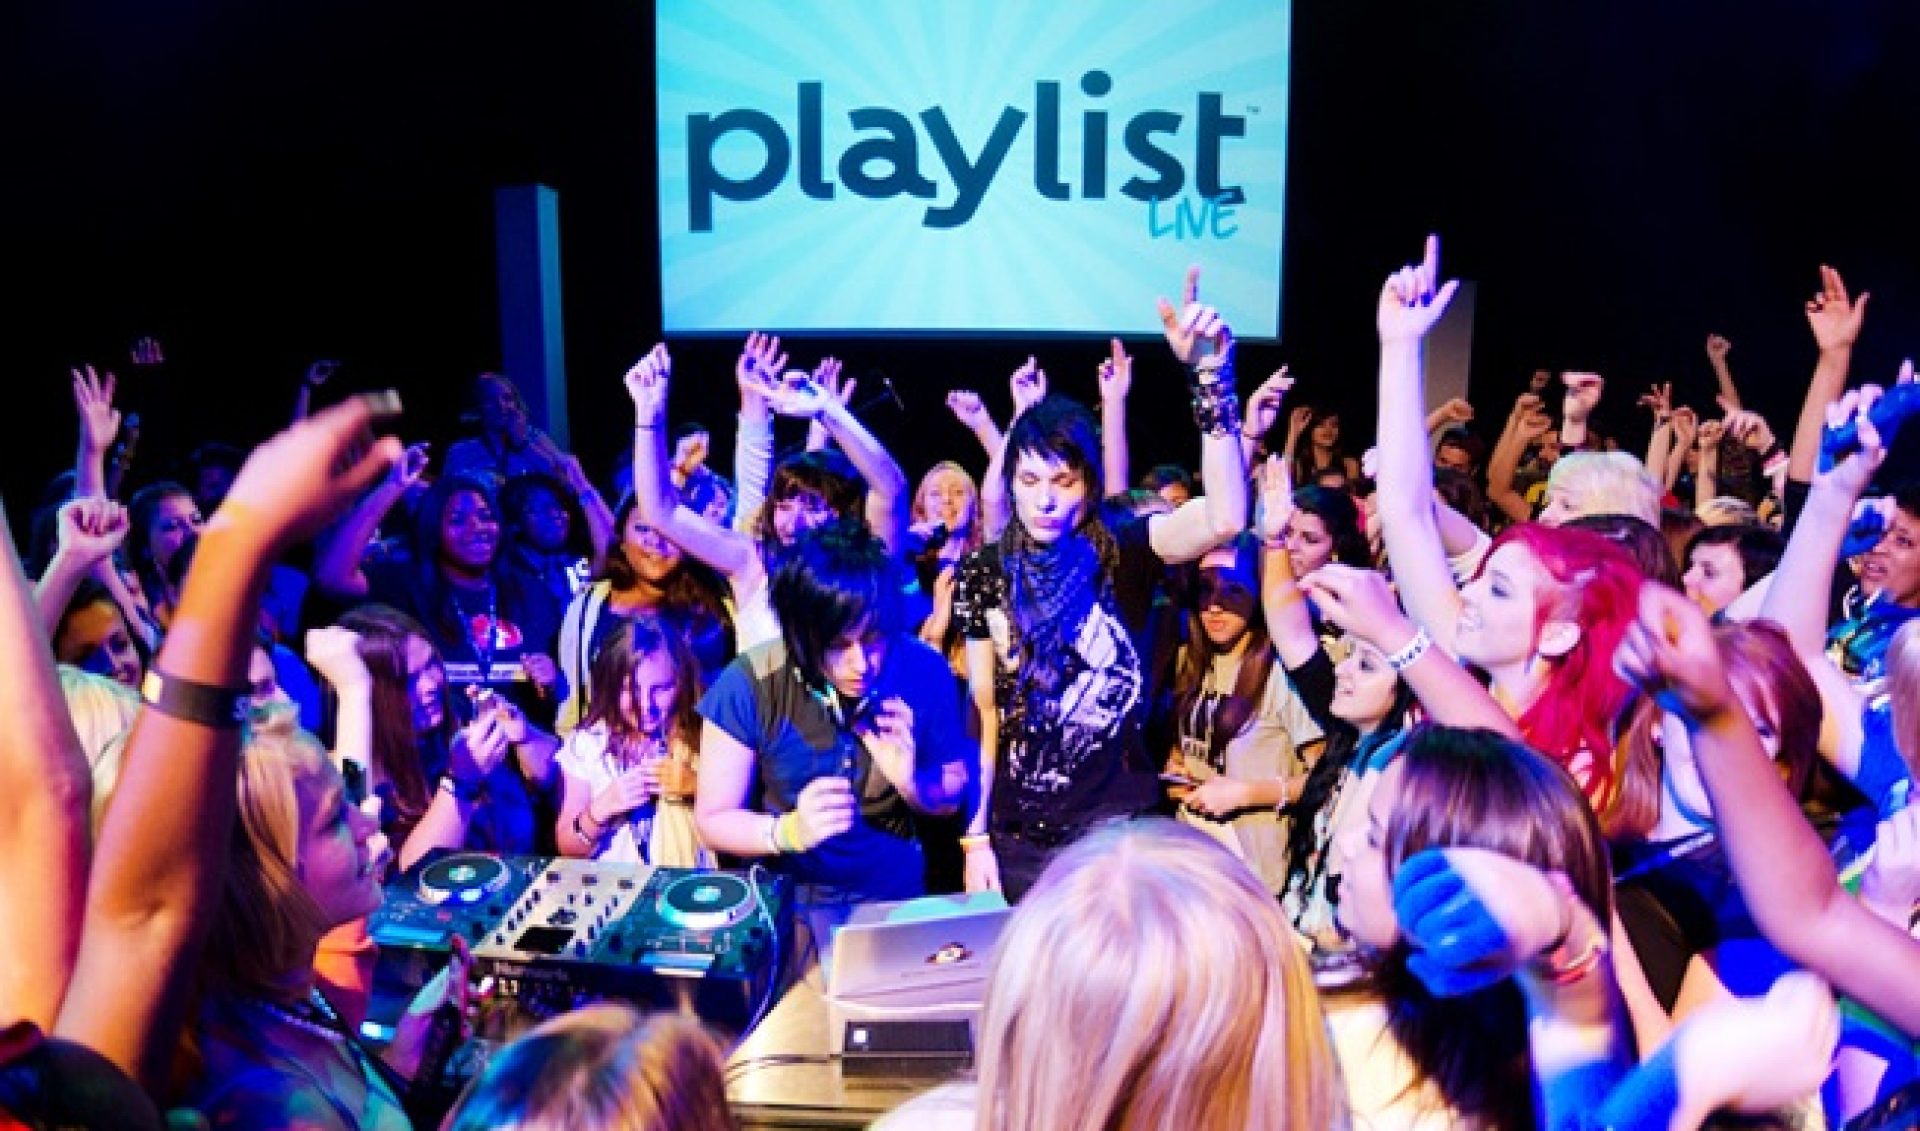 Tubefilter’s Guide To Playlist Live Tri-State 2014